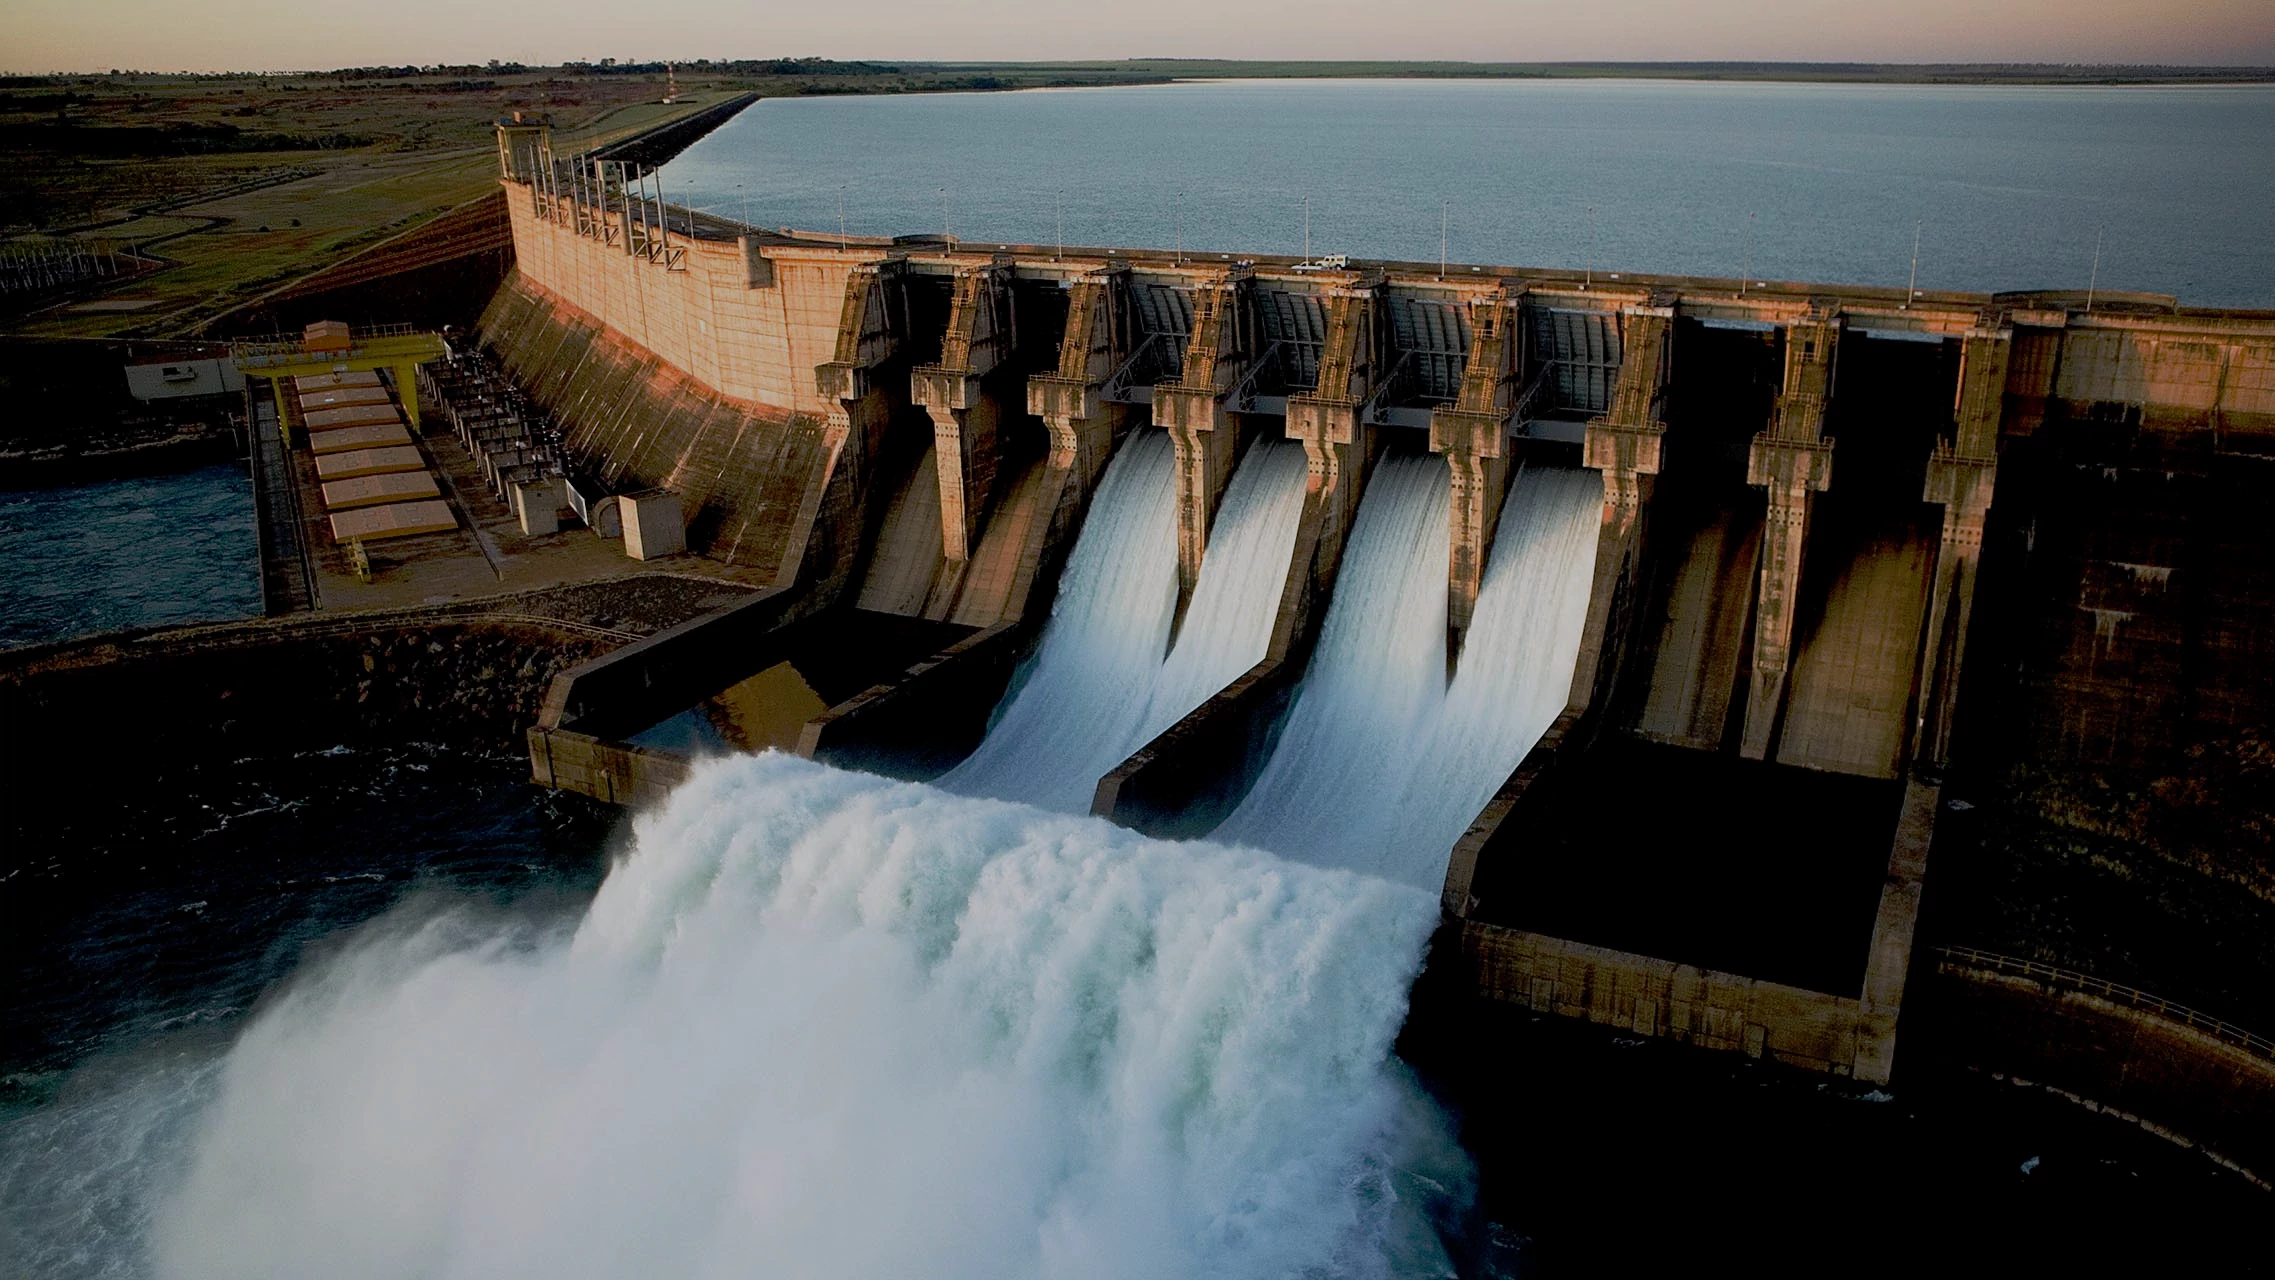 Asiapower sources experts for power generation and water technologies.